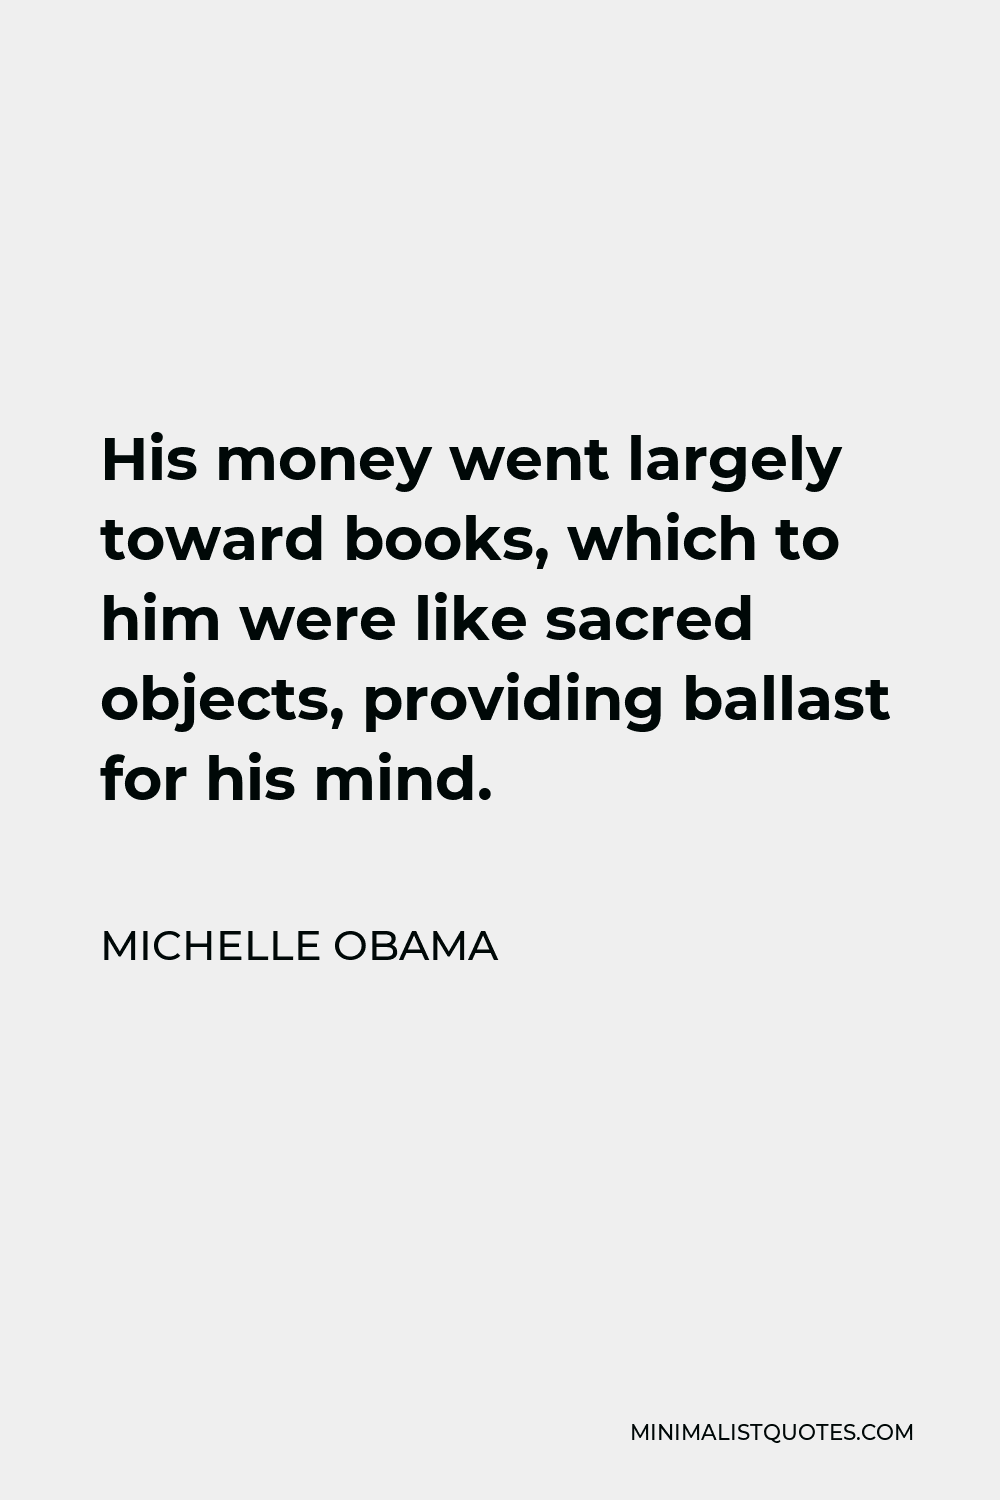 Michelle Obama Quote - His money went largely toward books, which to him were like sacred objects, providing ballast for his mind.